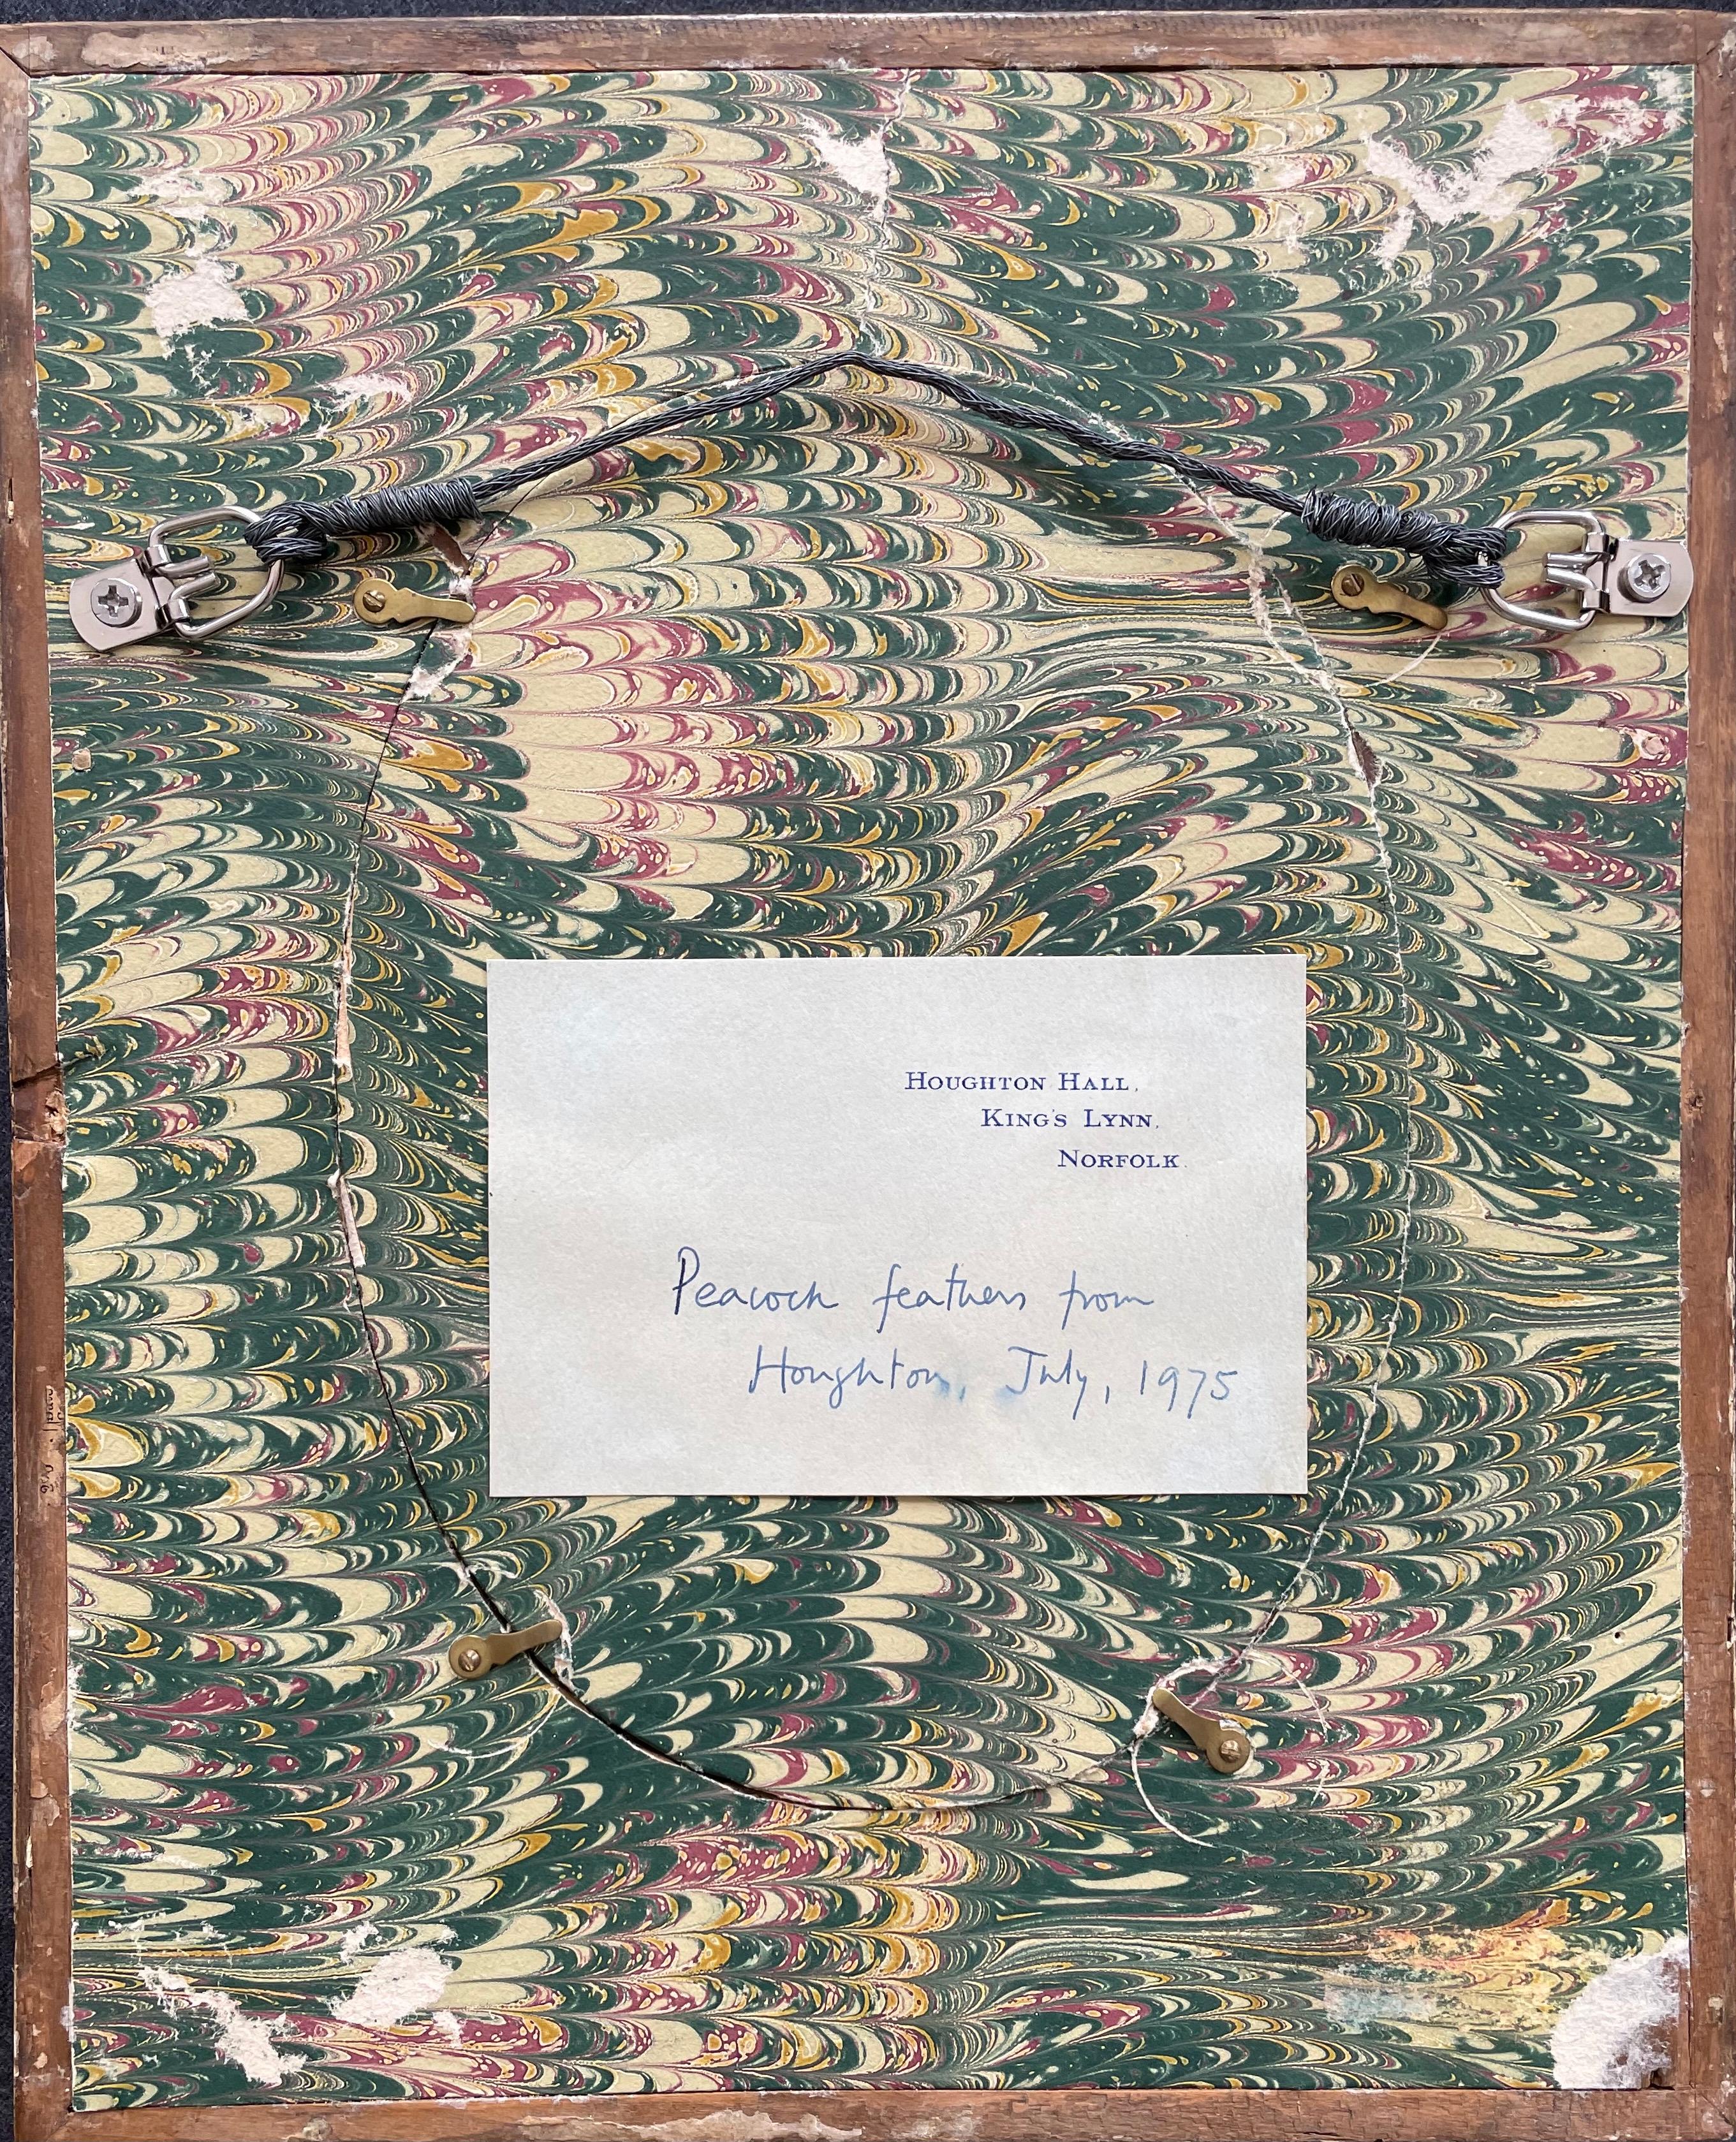 This peacock feather in an 18th-century giltwood frame comes from the estate of Jayne Wrightsman, the great collector, the Metropolitan Museum benefactor, and socialite, who died at the age of 100 in 2019. Affixed to the back of the frame is a label